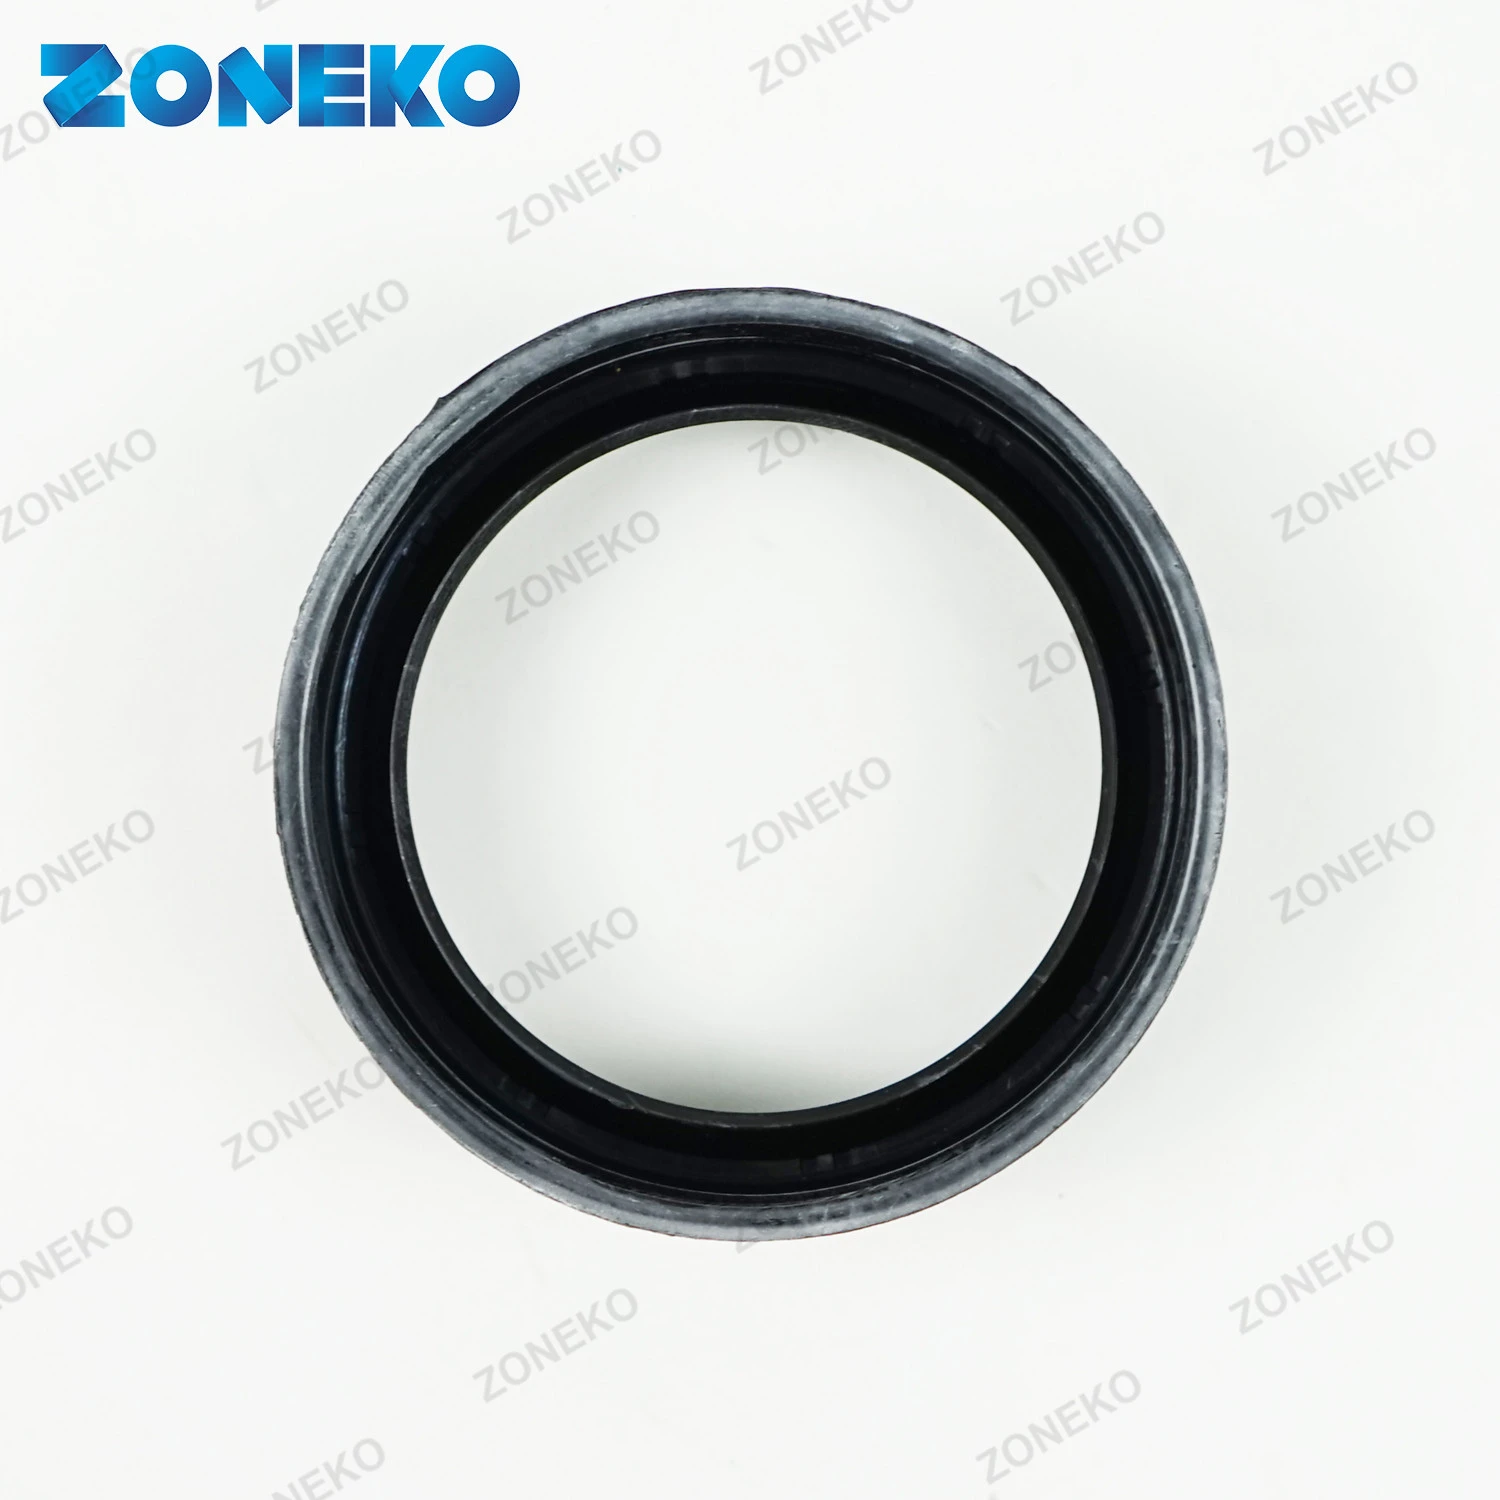 Auto Spare Parts Oil Seal 90313-T0001 For KIJANG Hilux 90313-54001